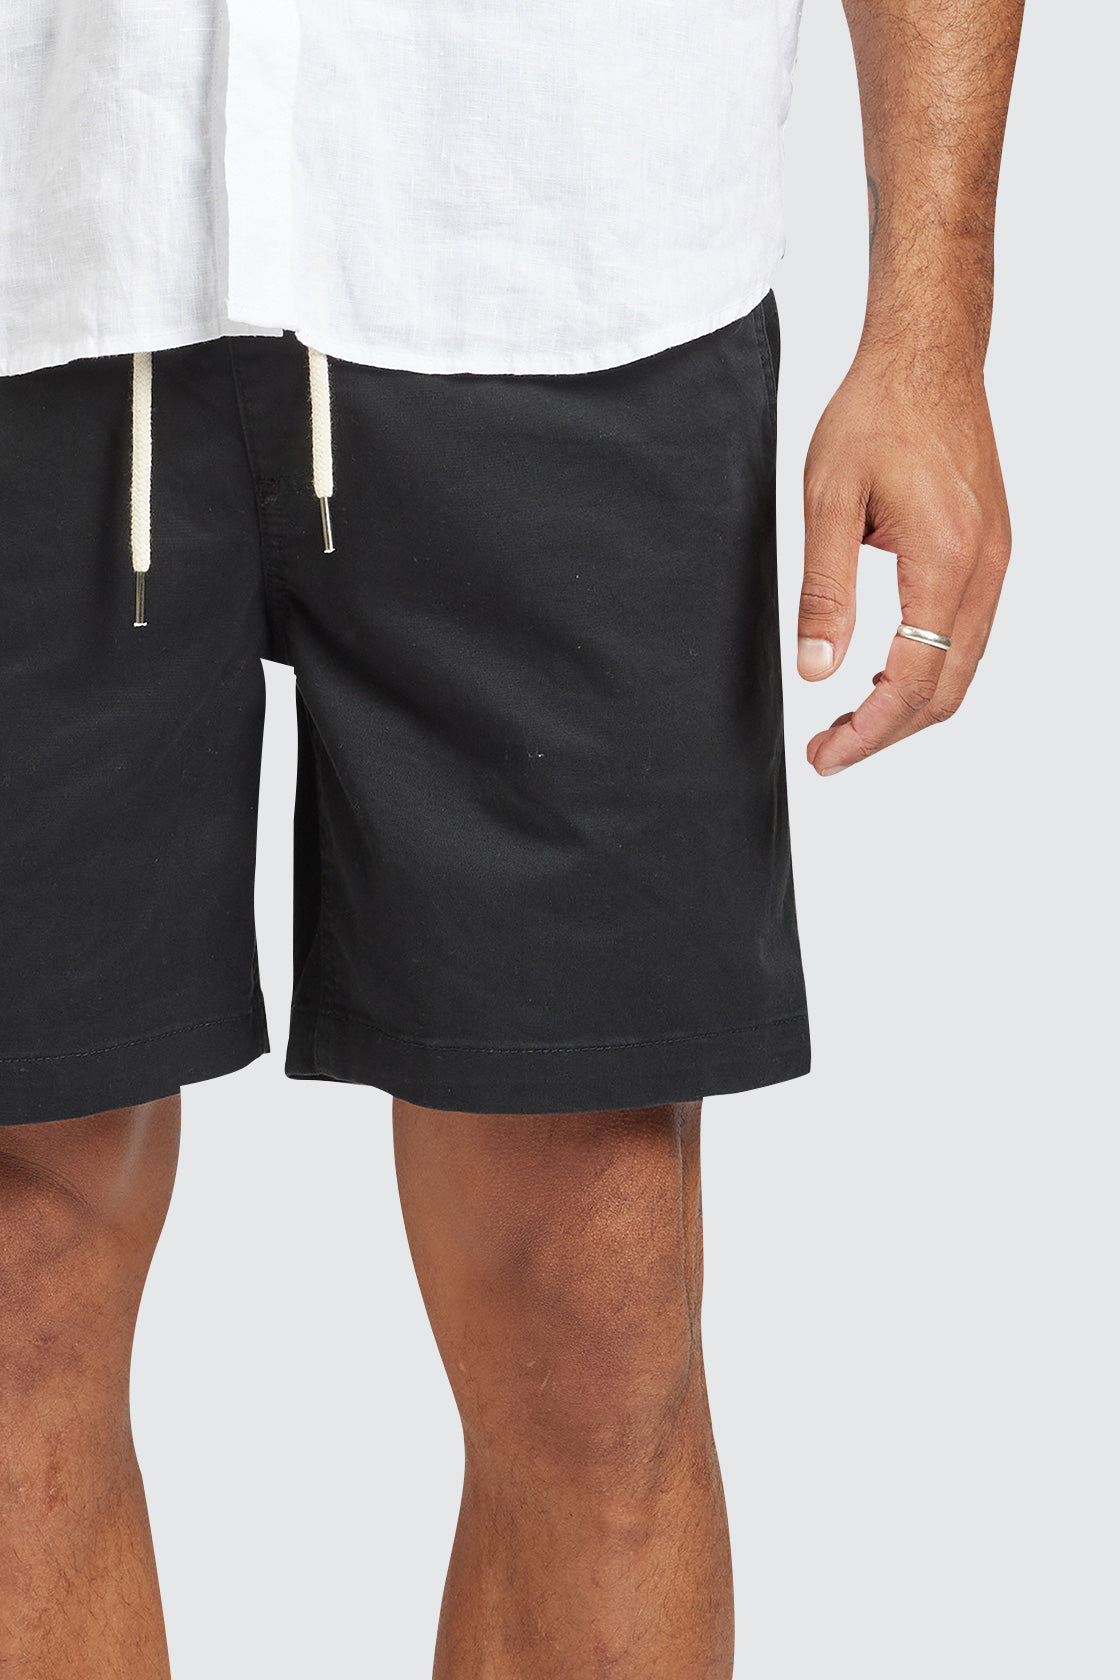 The Academy Brand Volley Short Black